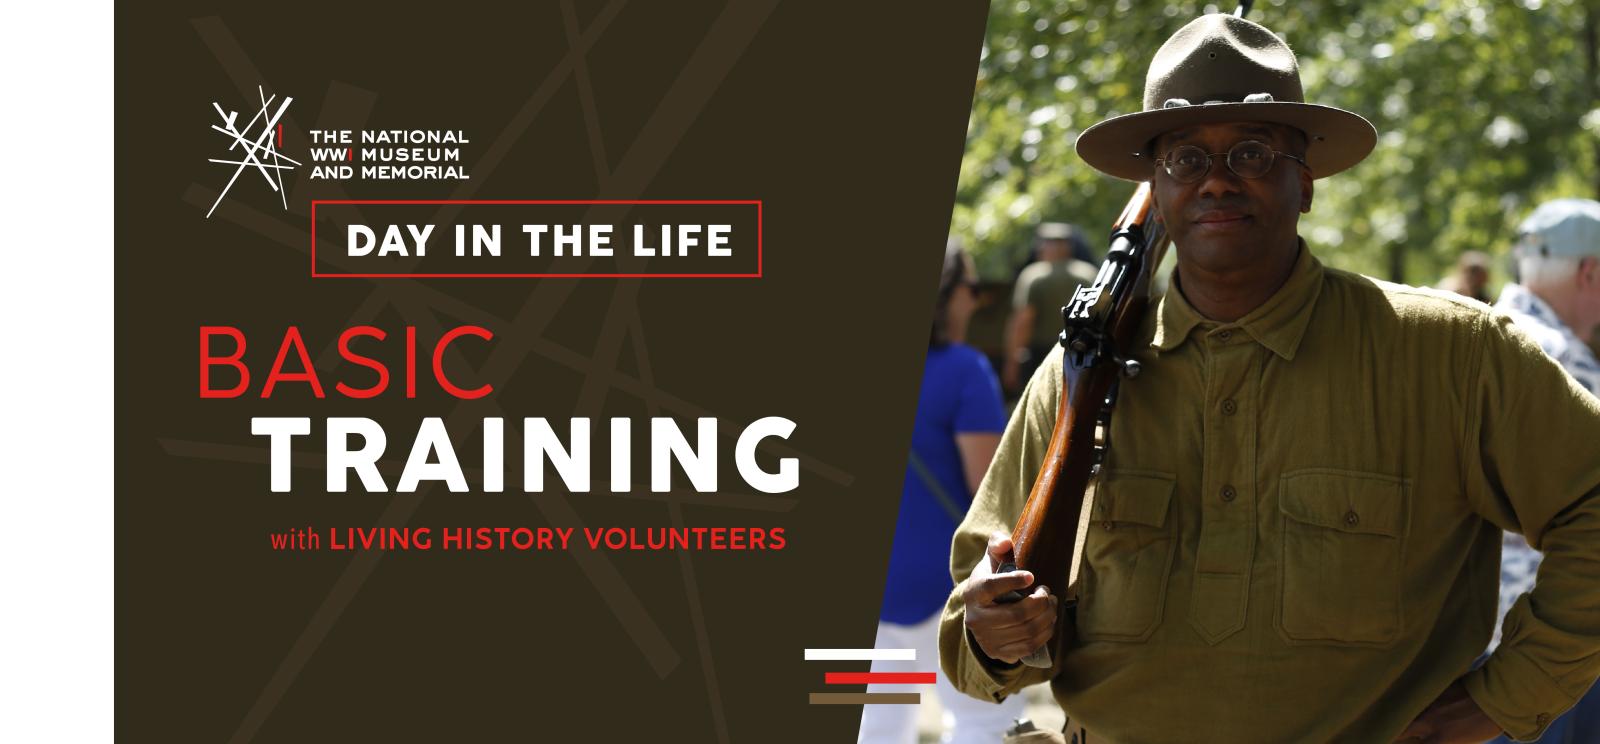 Text on left: Day in the Life / Basic Training. Image on right: A Black man wearing an olive-green WWI uniform and brimmed hat with a rifle over his shoulder looking at the camera.